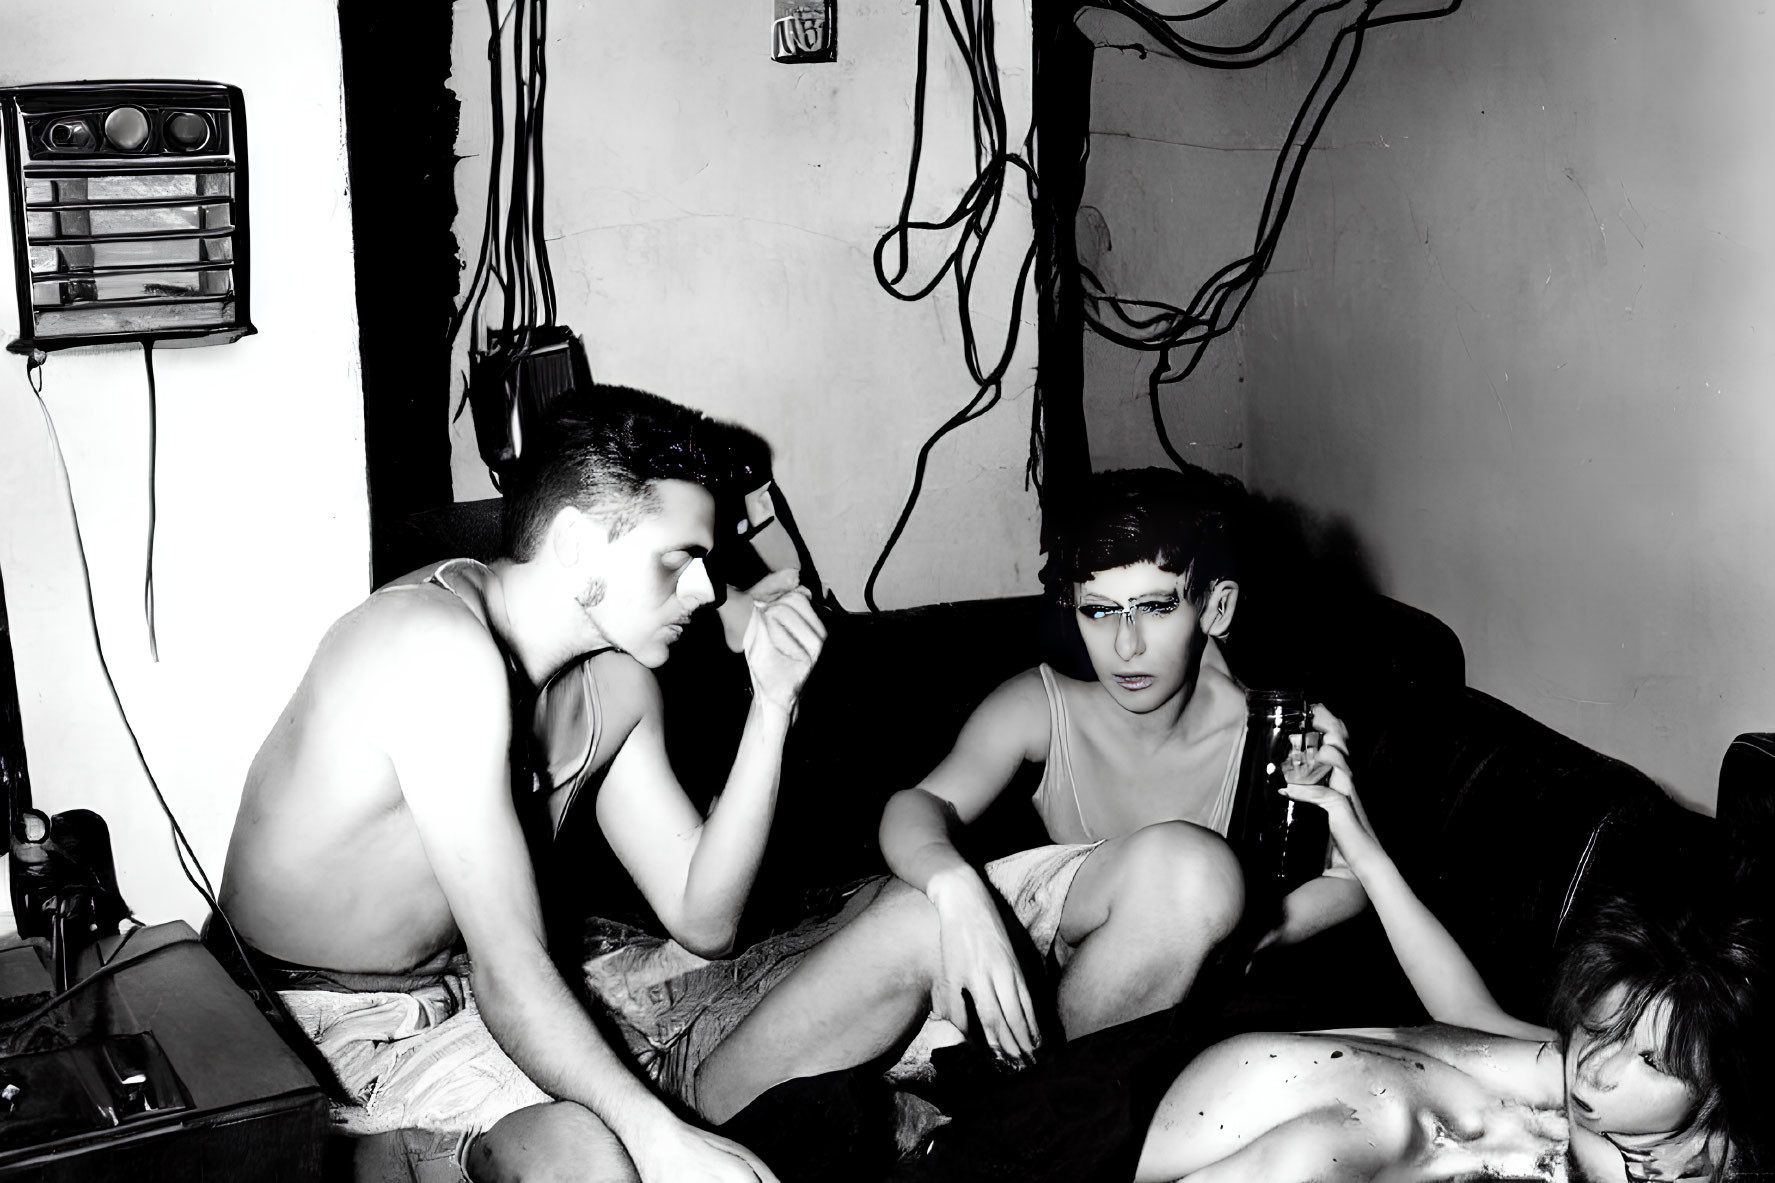 Monochrome photo of three people in messy room with wires and cassette player